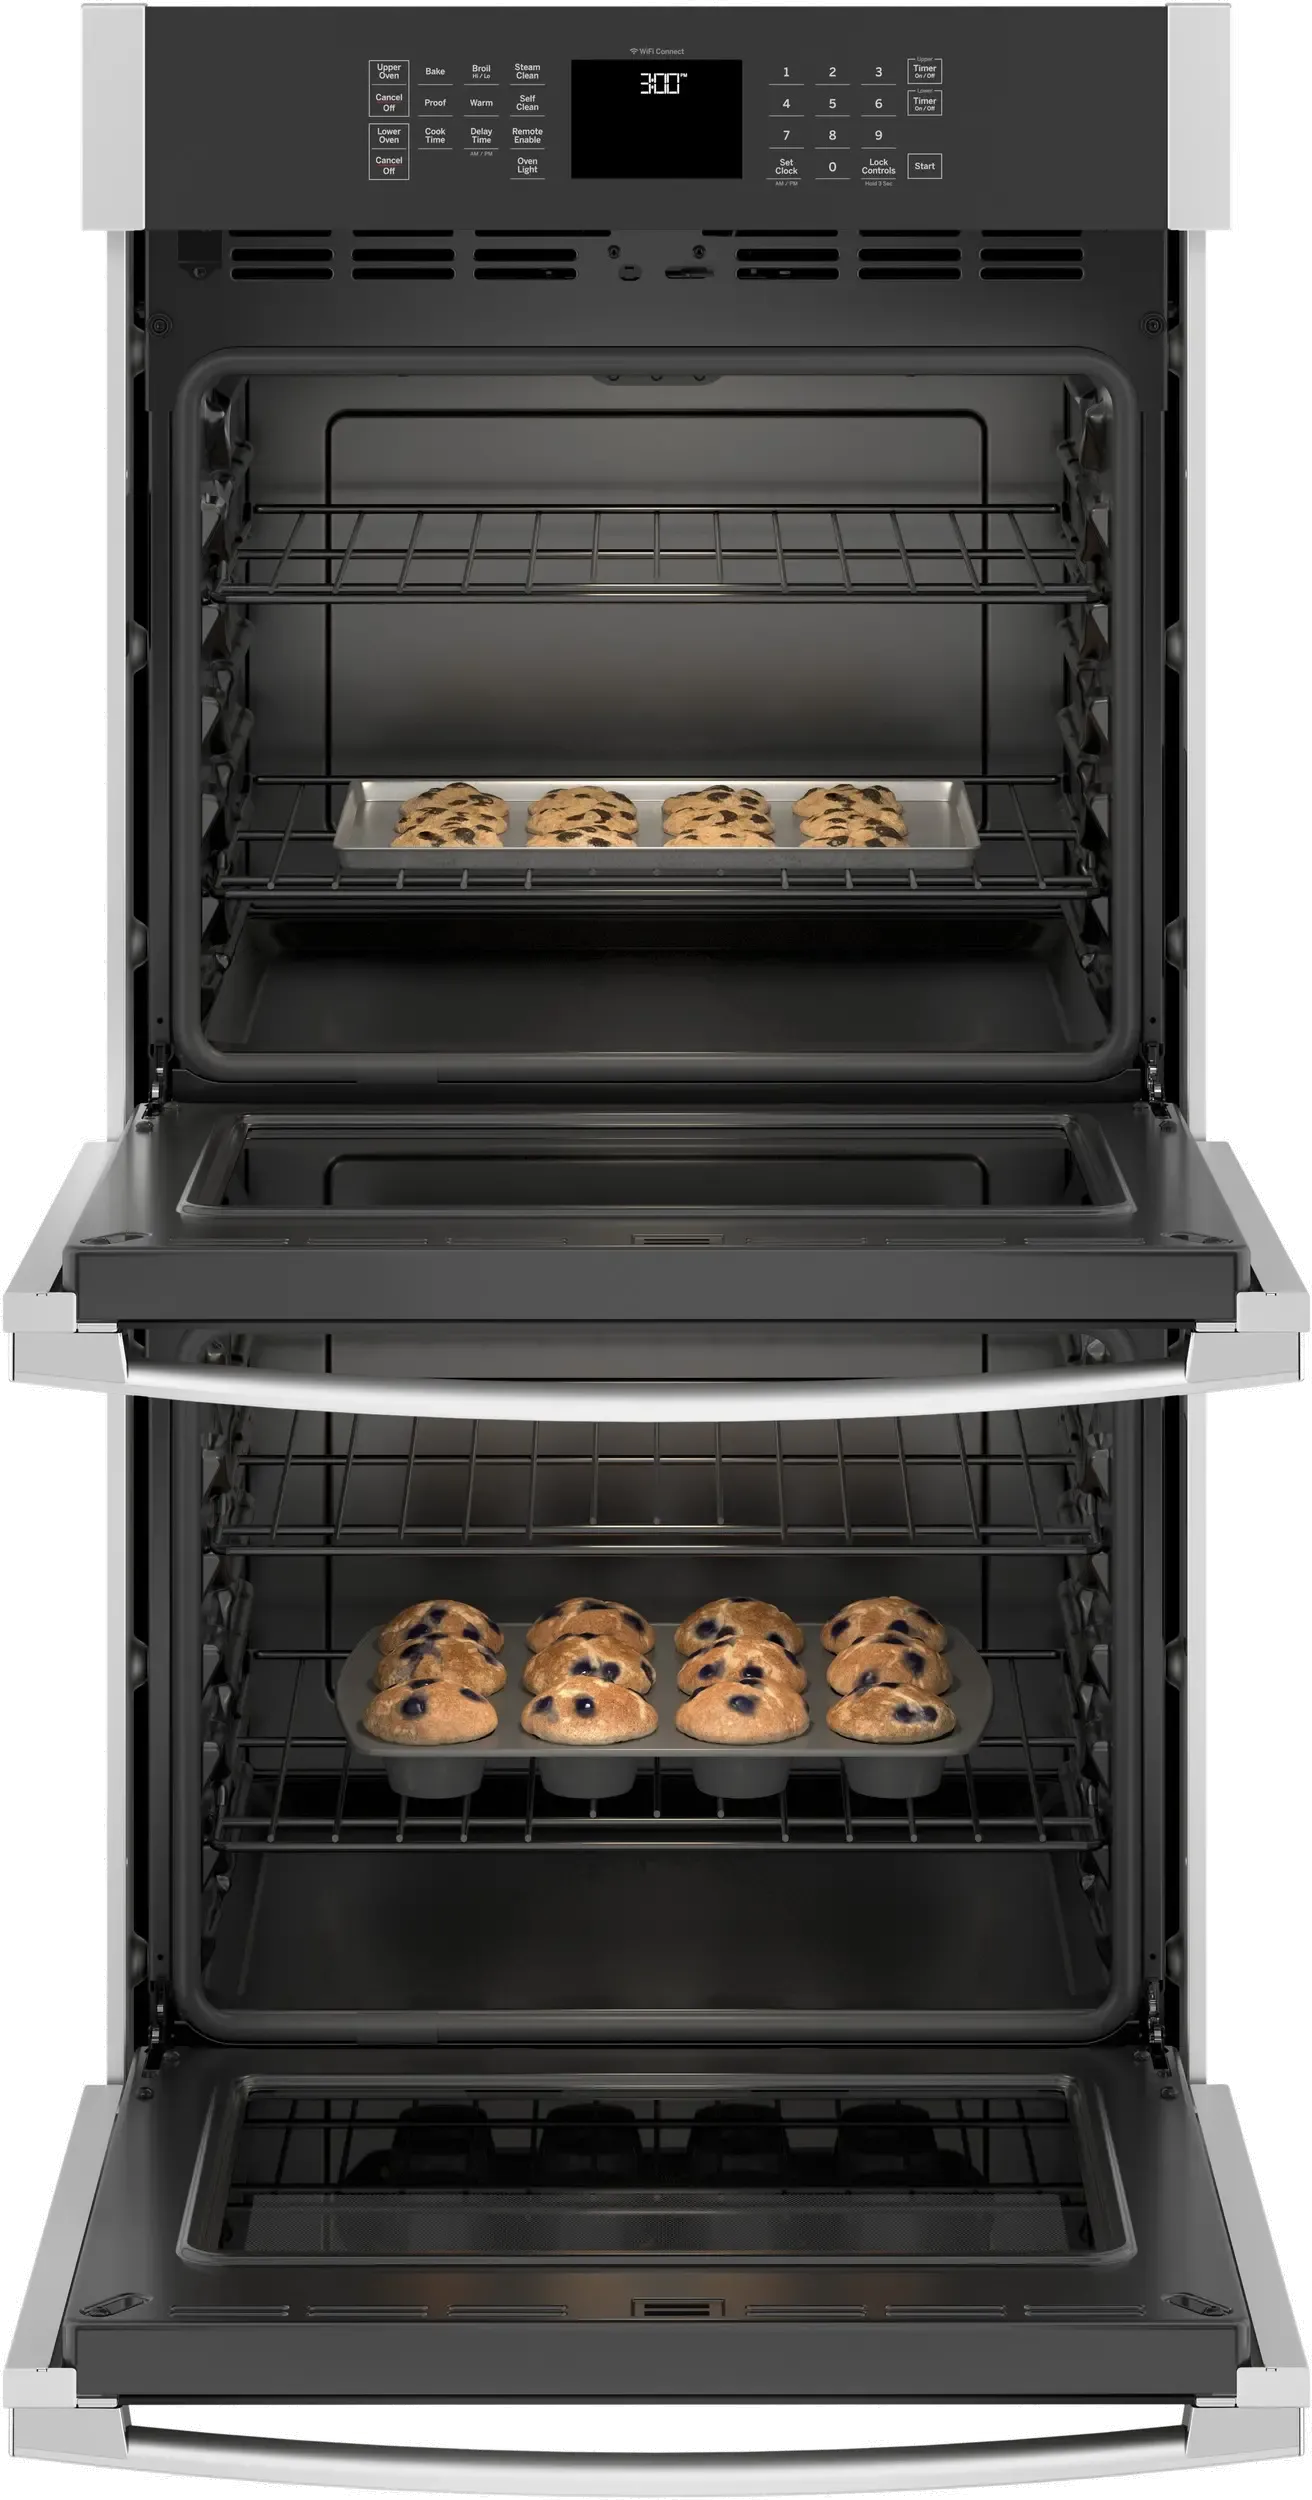 GE Double Wall Oven JKD3000SNSS